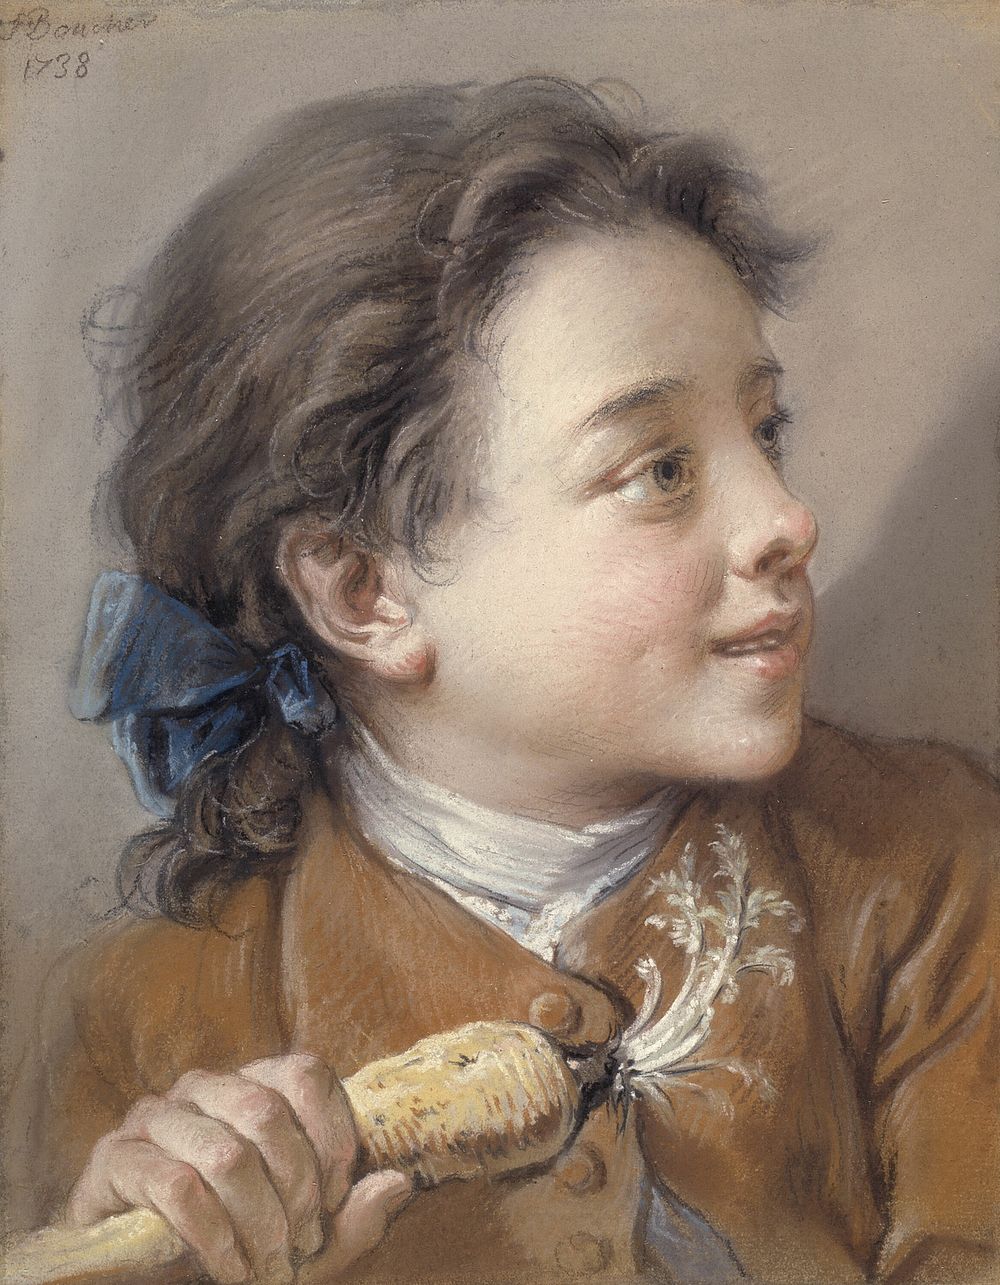 Boy with a Carrot by François Boucher